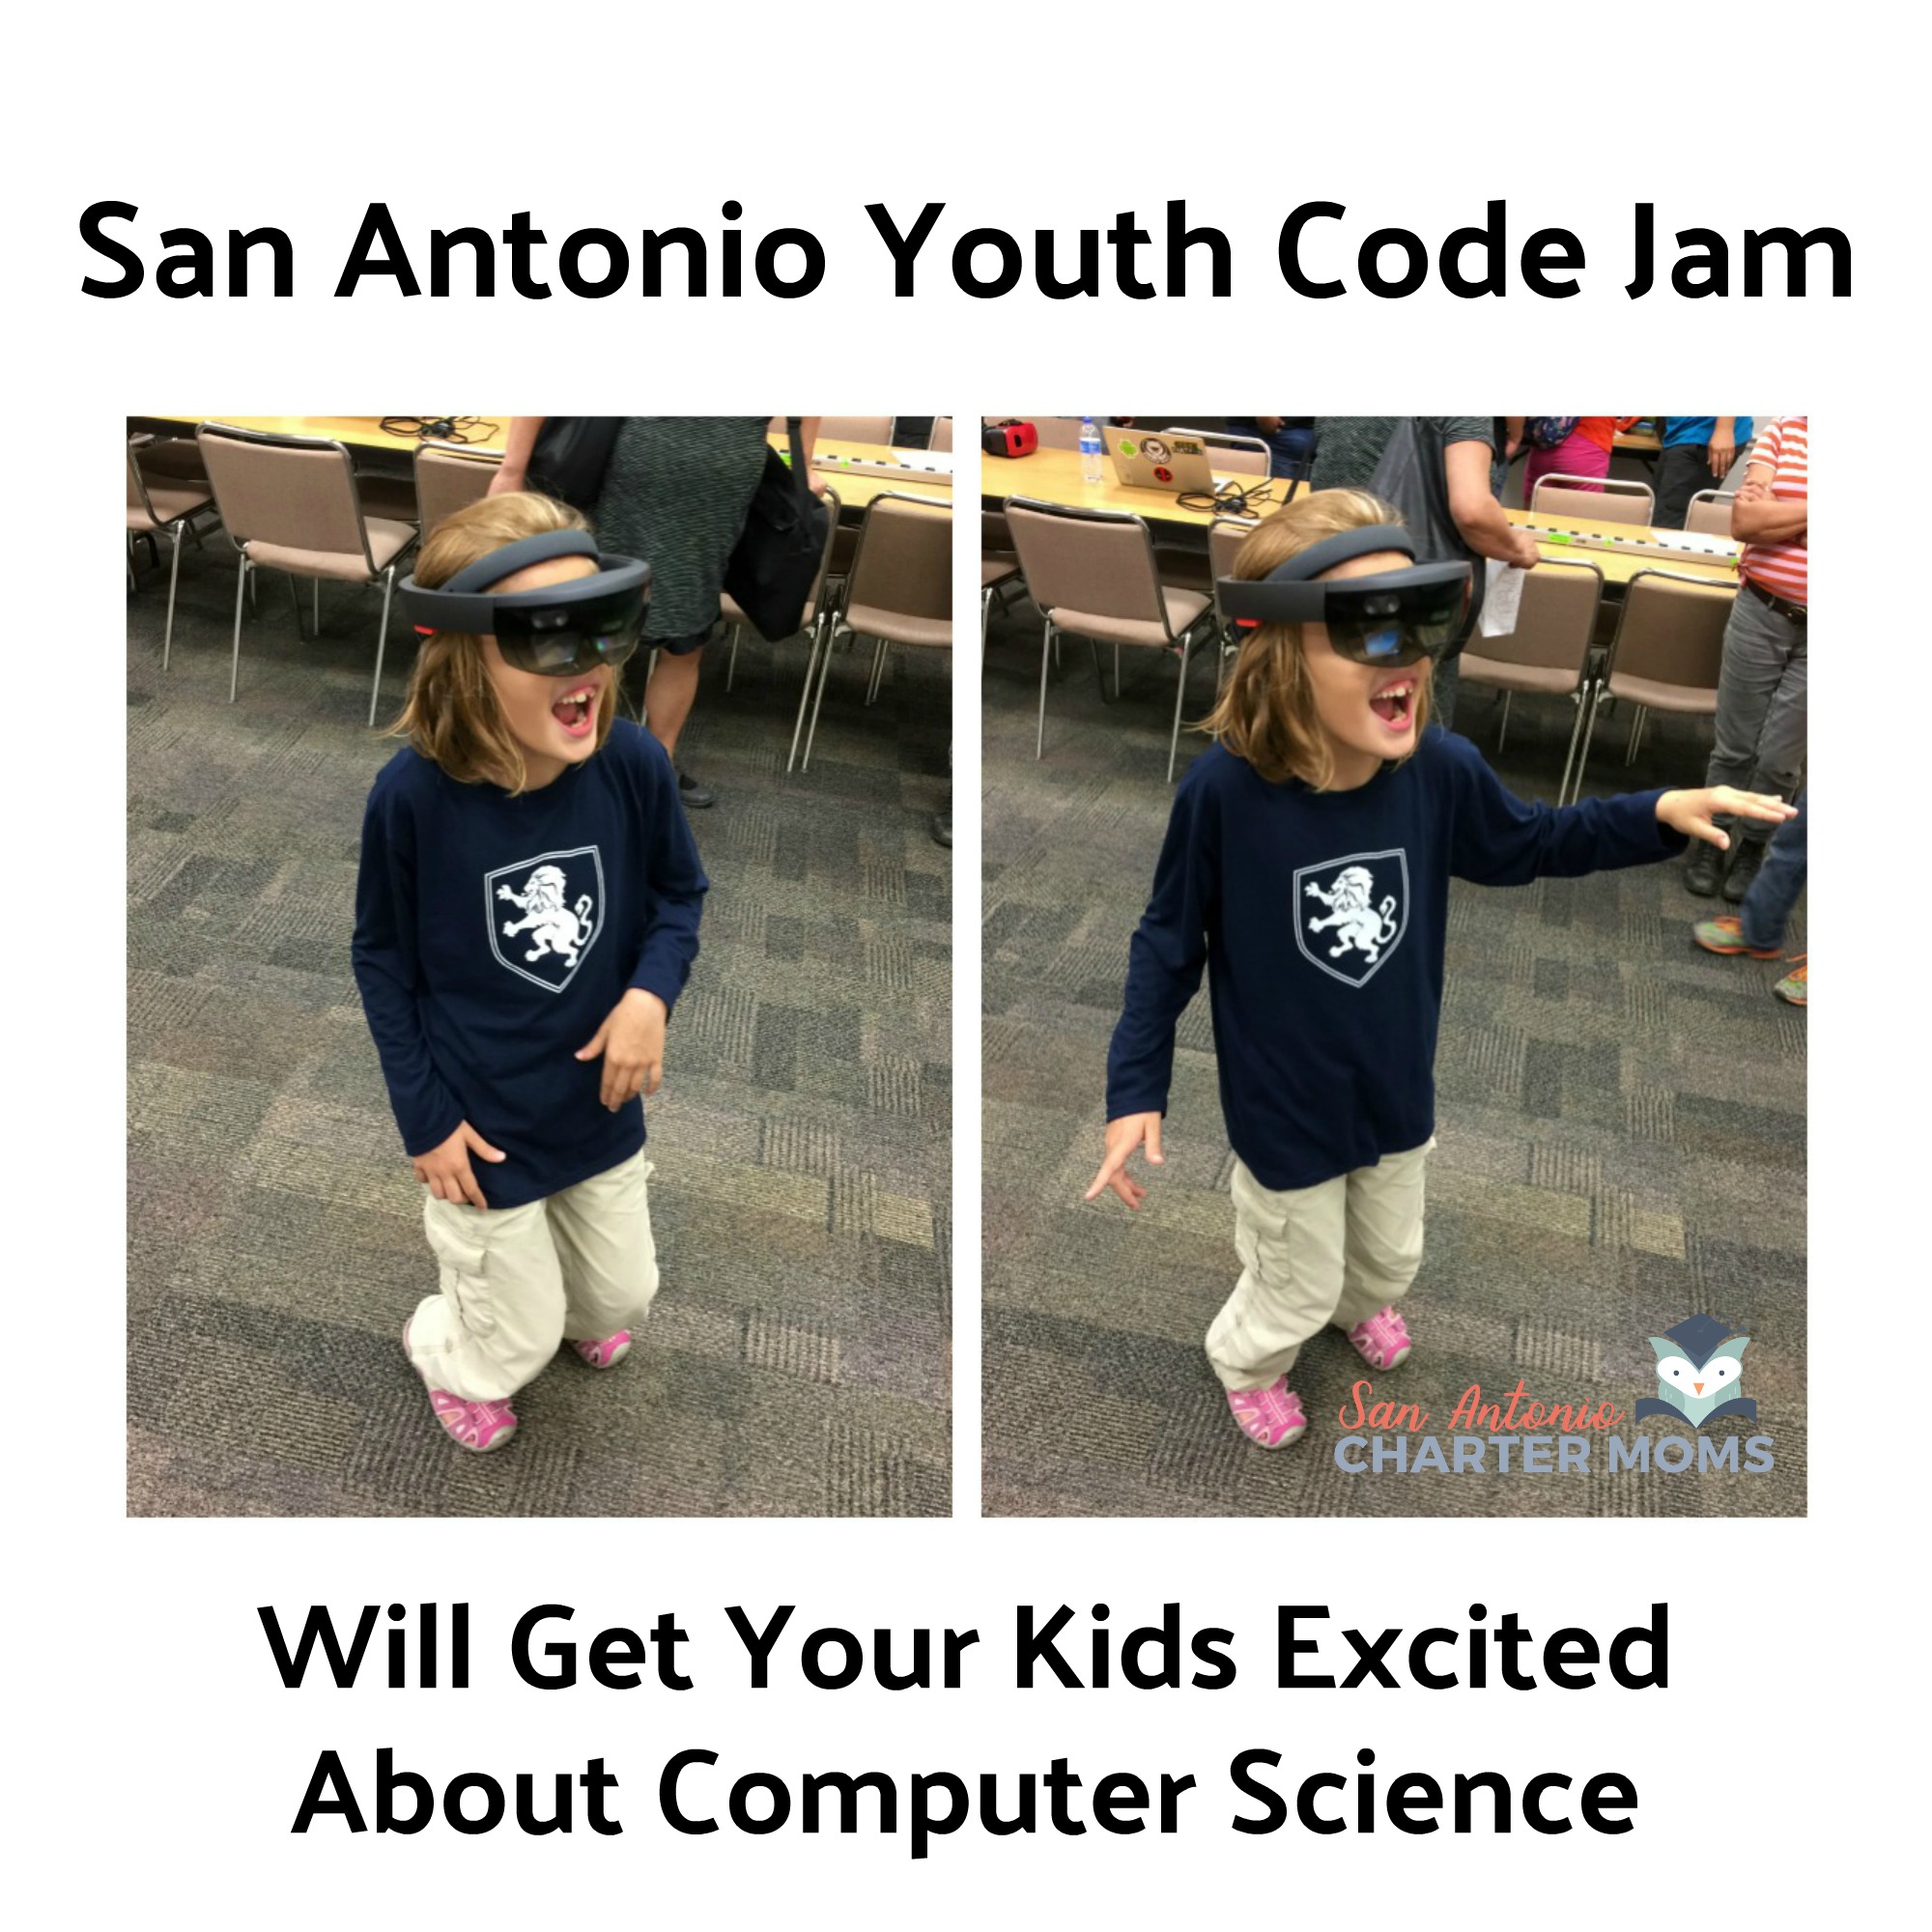 San Antonio Youth Code Jam Will Get Your Kids Excited About Computer Science | San Antonio Charter Moms